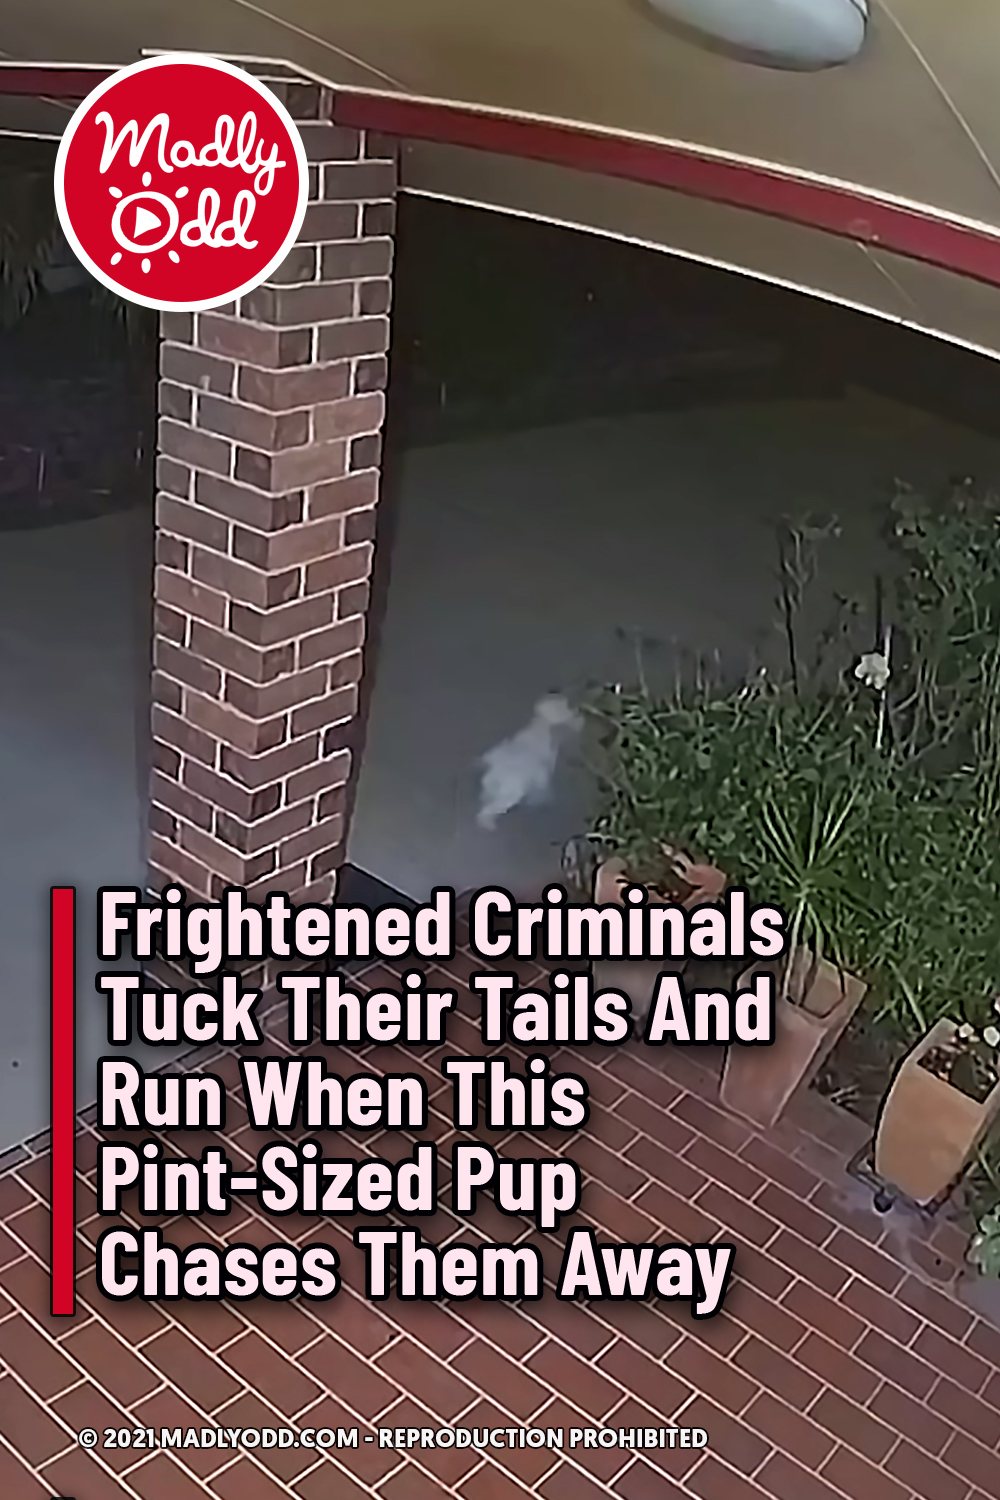 Frightened Criminals Tuck Their Tails And Run When This Pint-Sized Pup Chases Them Away